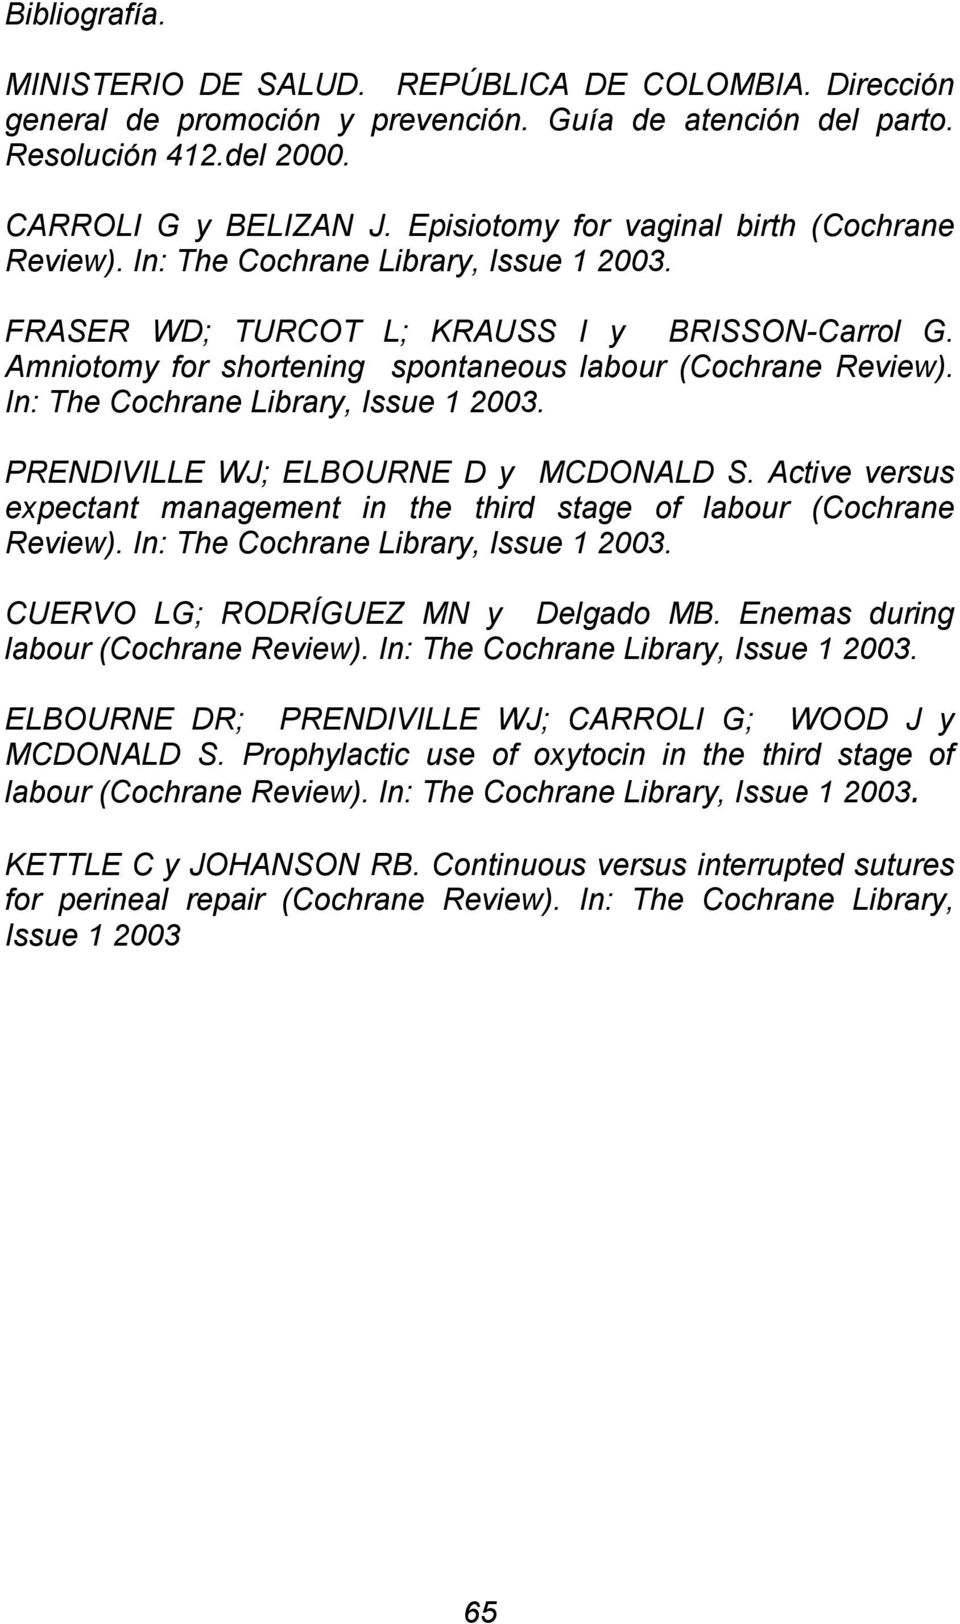 In: The Cochrane Library, Issue 1 2003. PRENDIVILLE WJ; ELBOURNE D y MCDONALD S. Active versus expectant management in the third stage of labour (Cochrane Review).